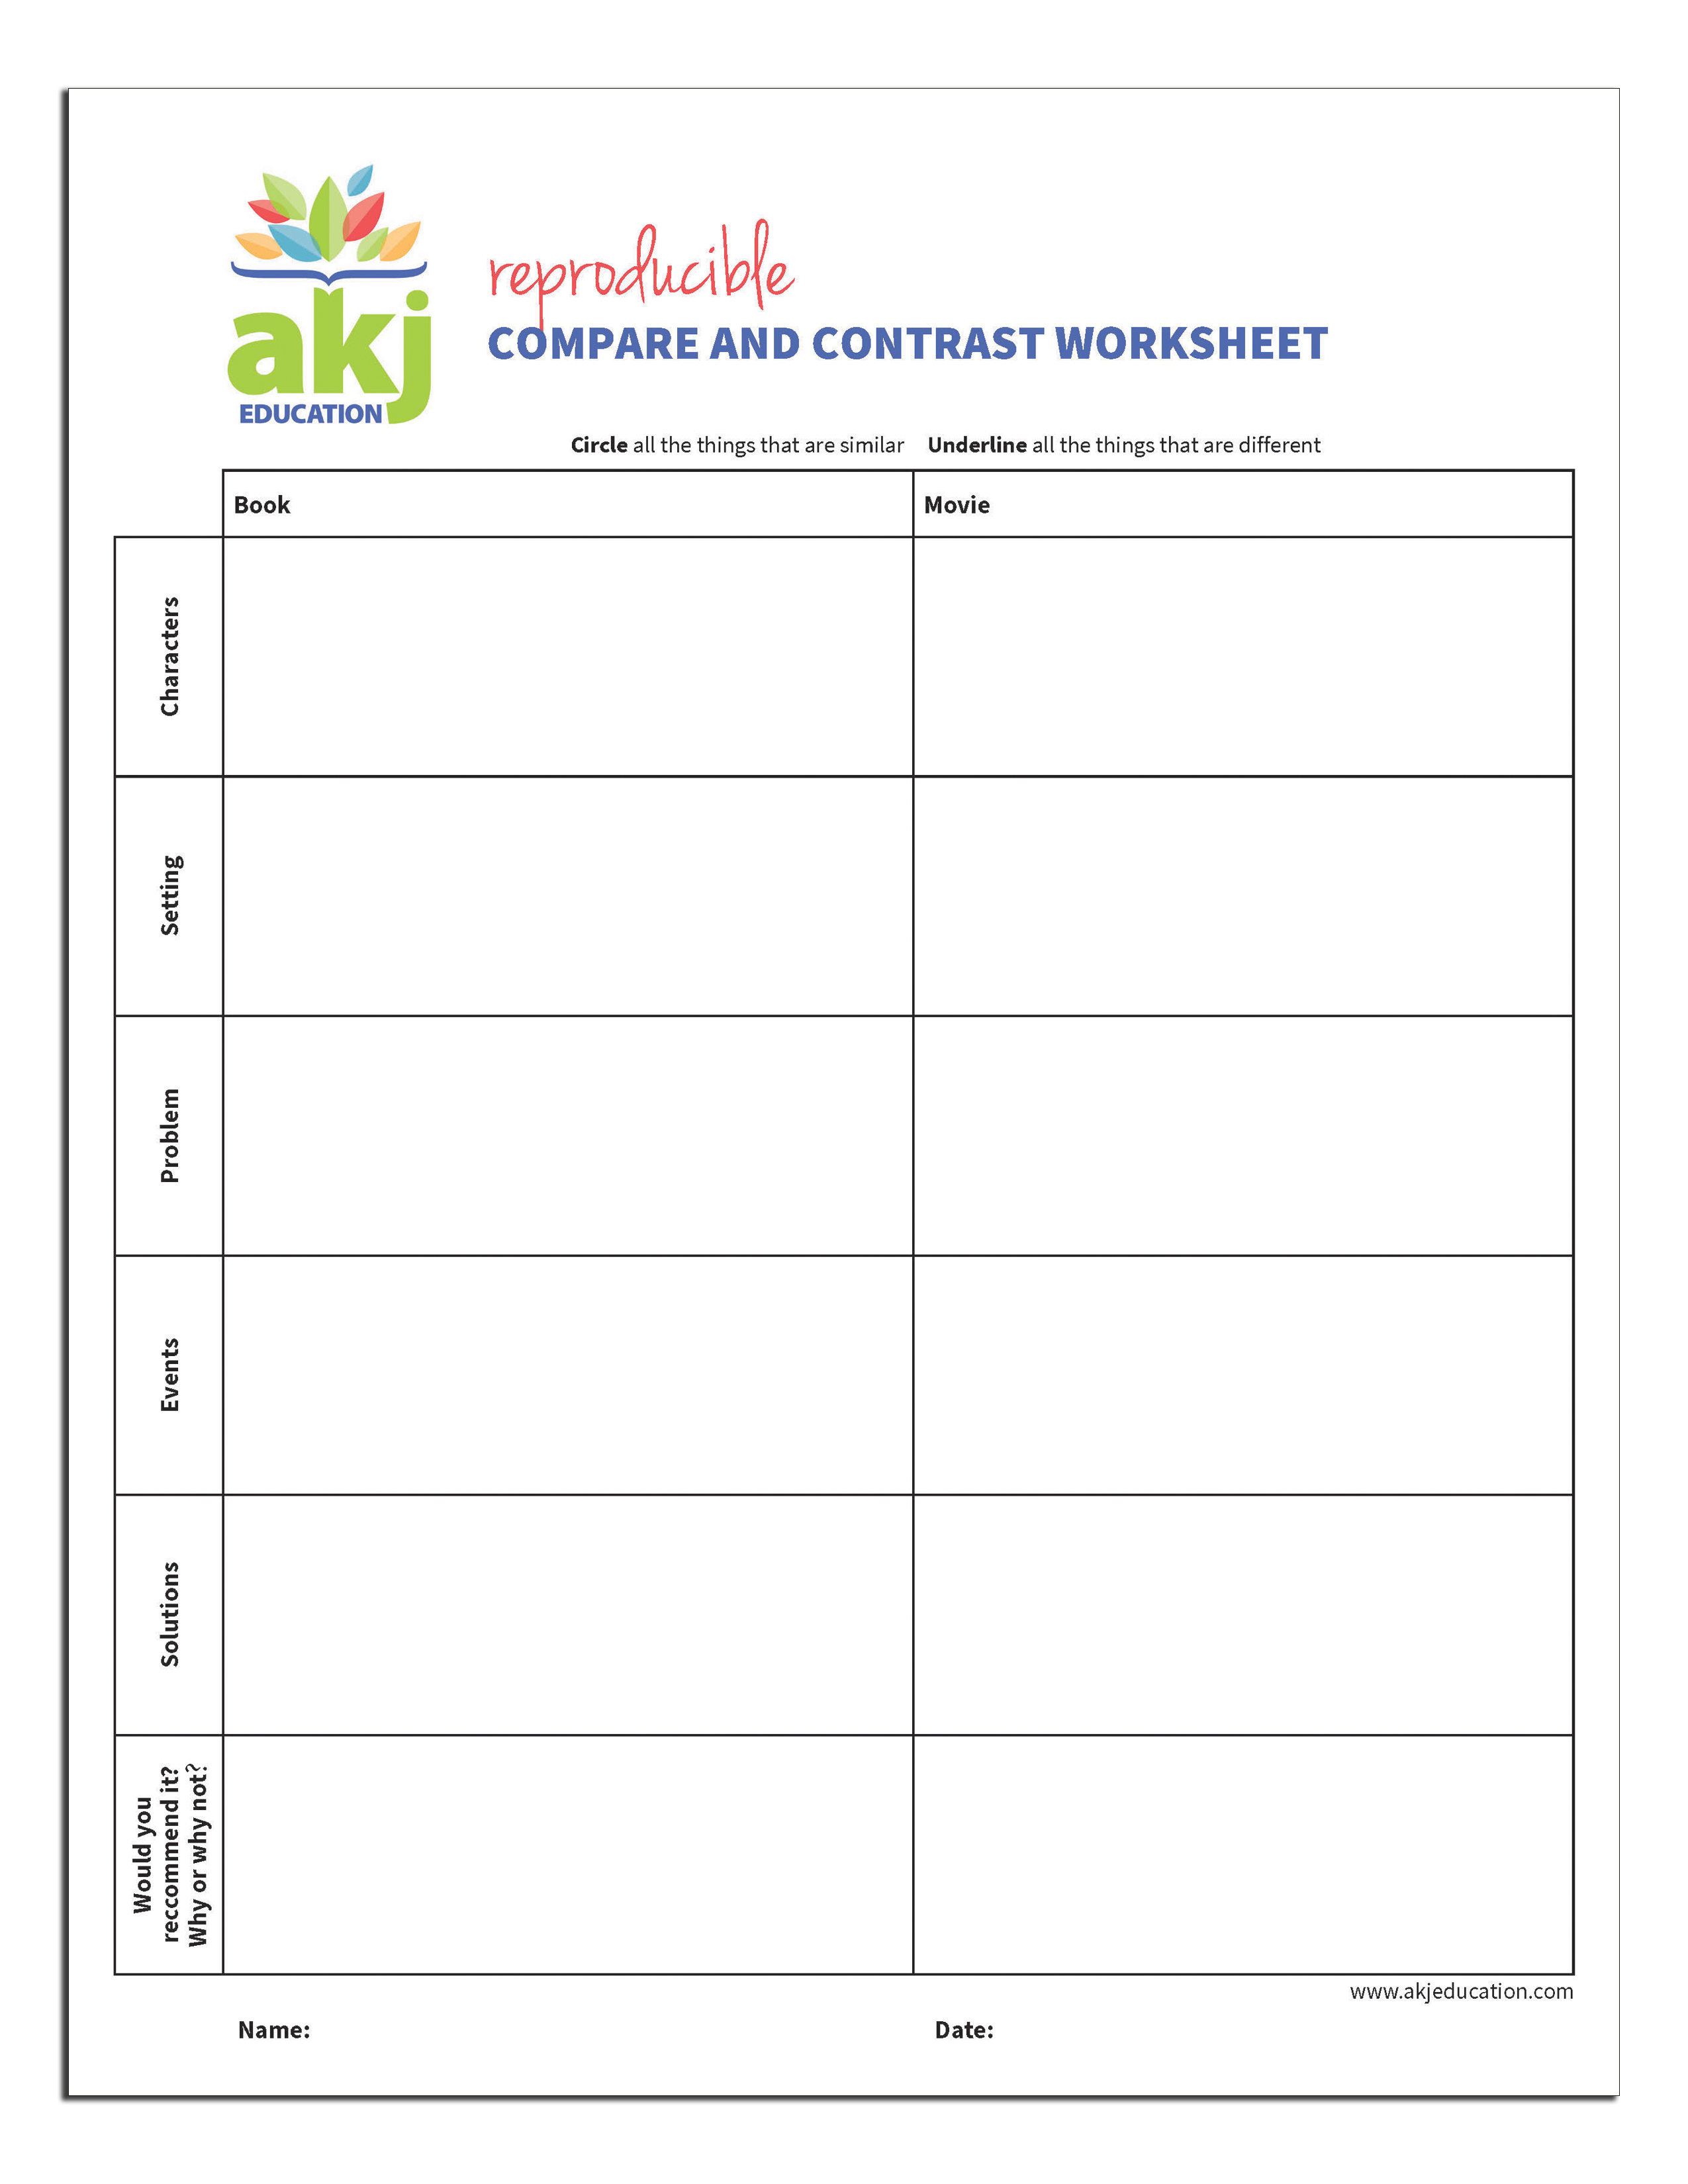 Compare and ContrastWorksheet_akjeducation